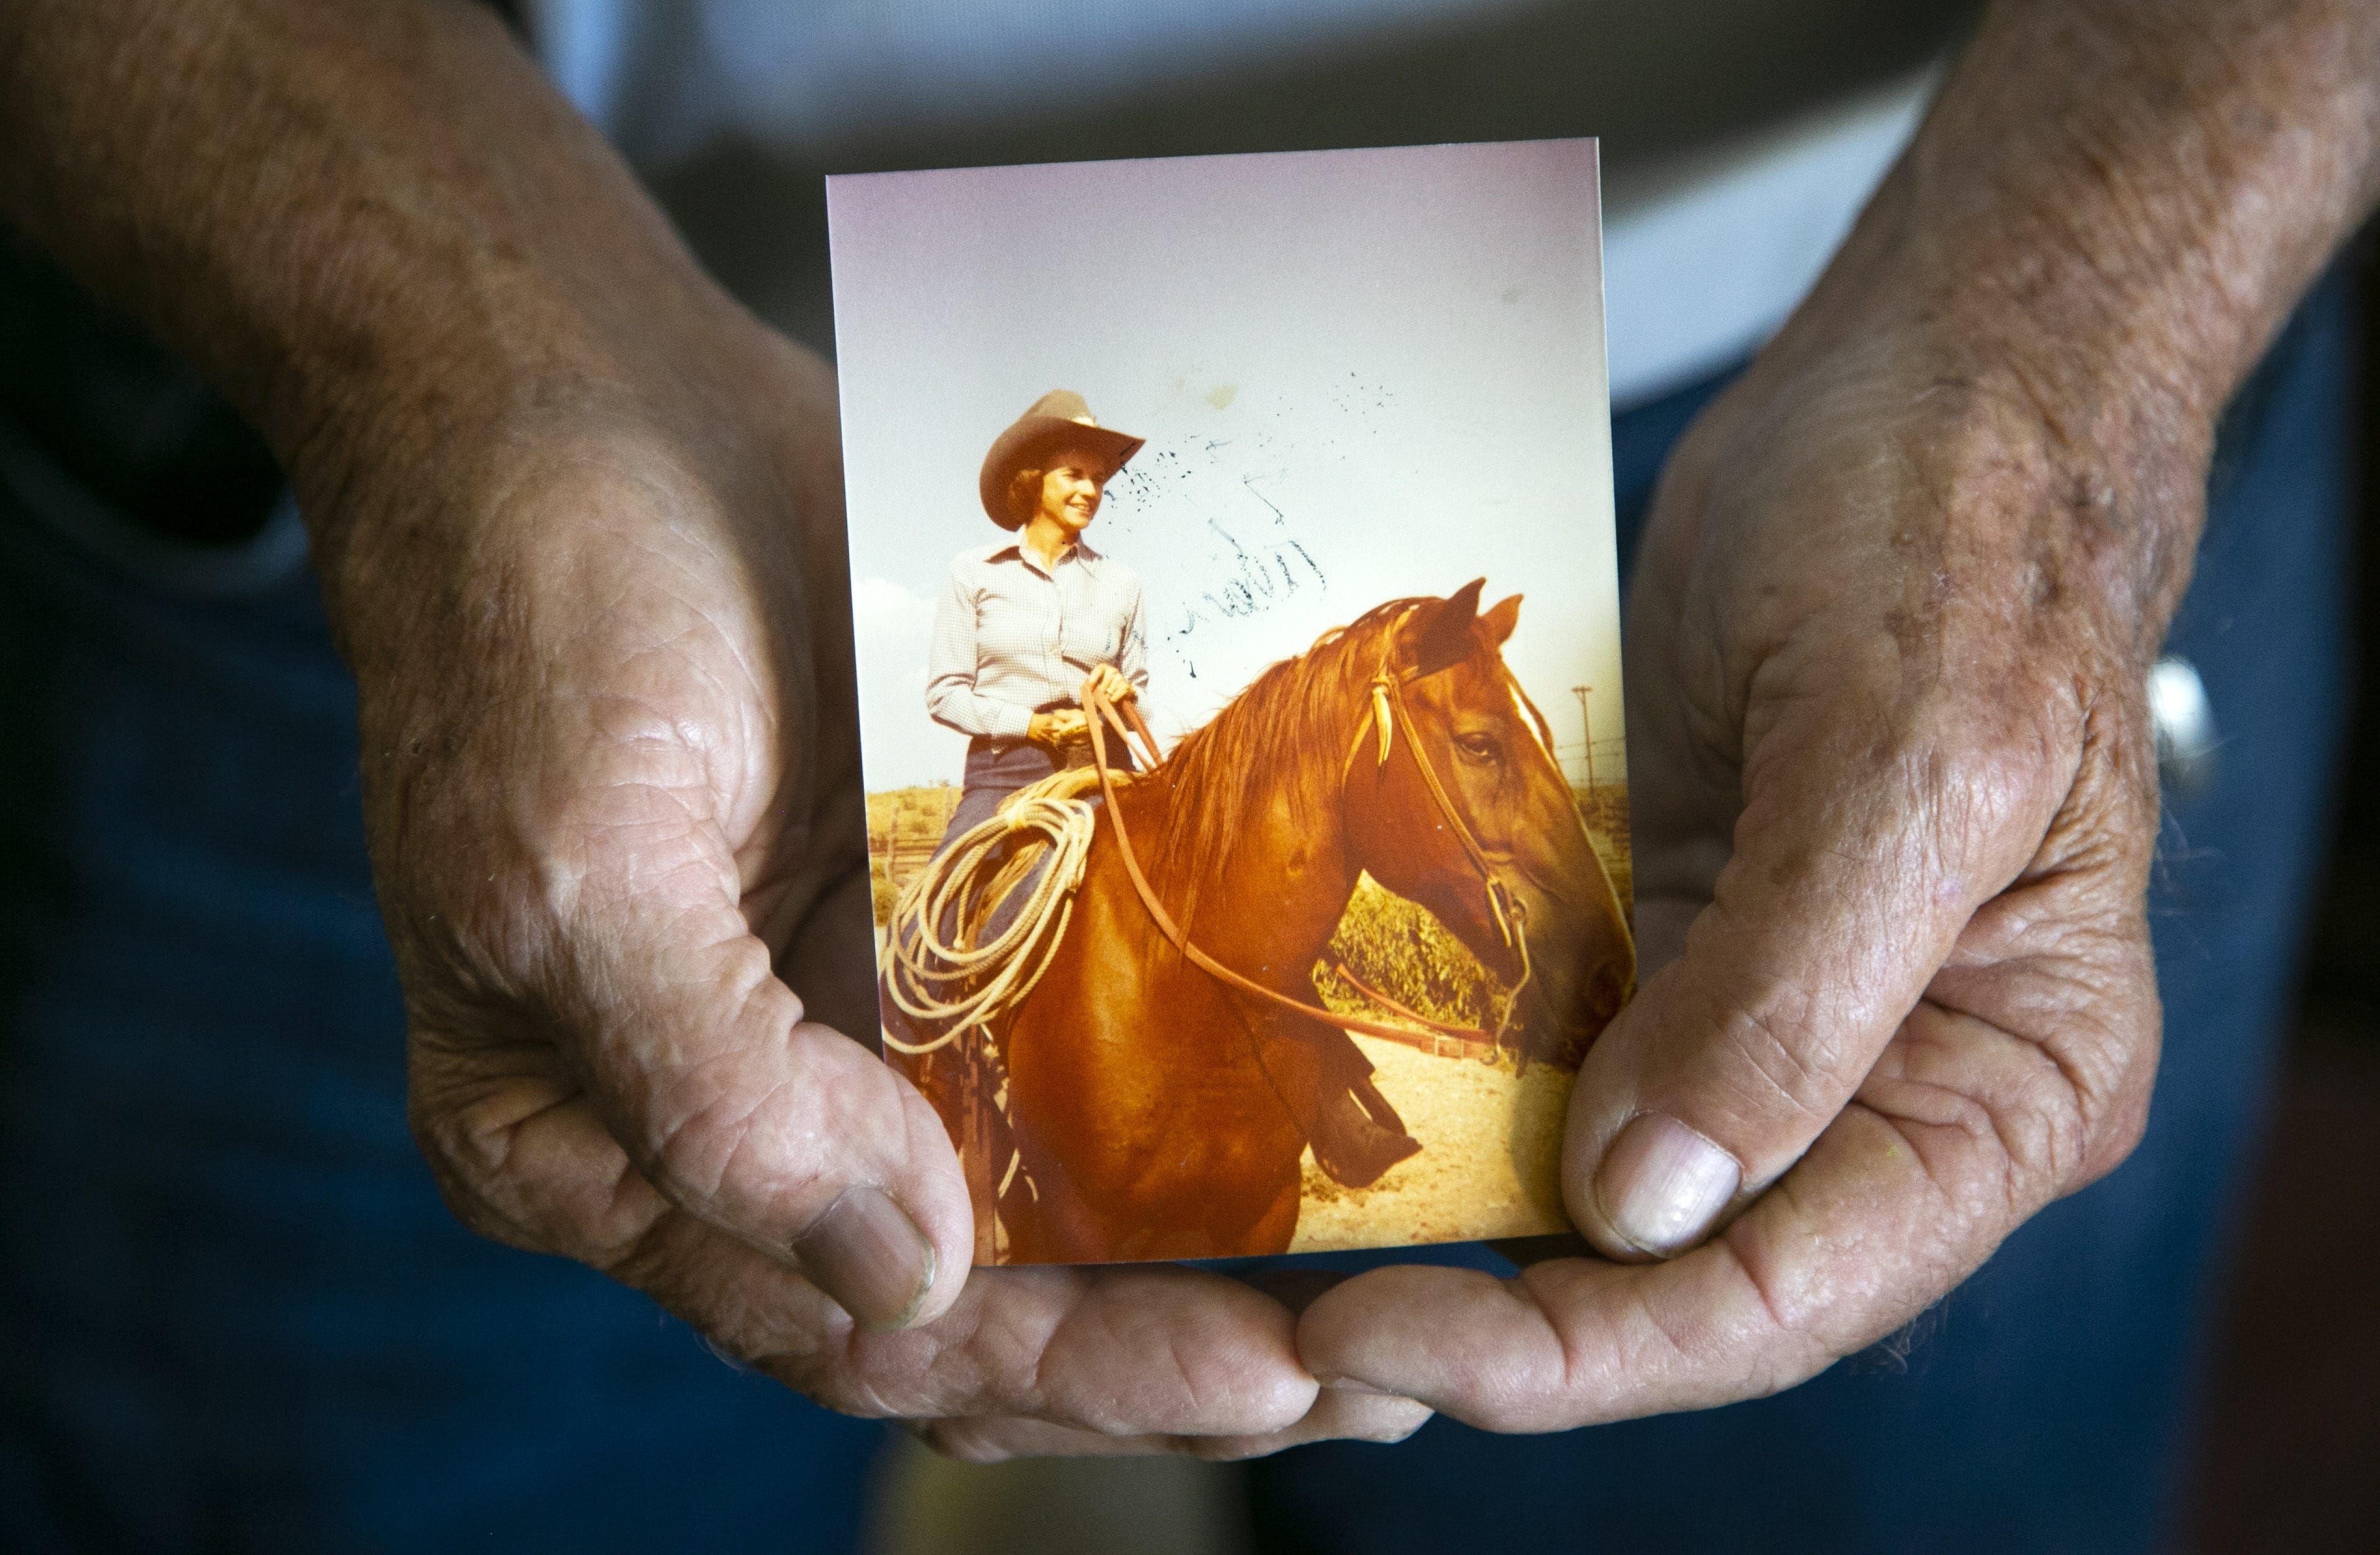 Alan Day, the brother of former Supreme Court Justice Sandra Day O'Connor, holds a photo his sister riding her favorite horse, "Chico," at the Lazy B Ranch outside of Duncan, Ariz., in the 1950s. Day was holding the photo at his Oro Valley home on Nov. 1, 2018. Former Supreme Court Justice Sandra Day O'Connor grew up on the cattle ranch.